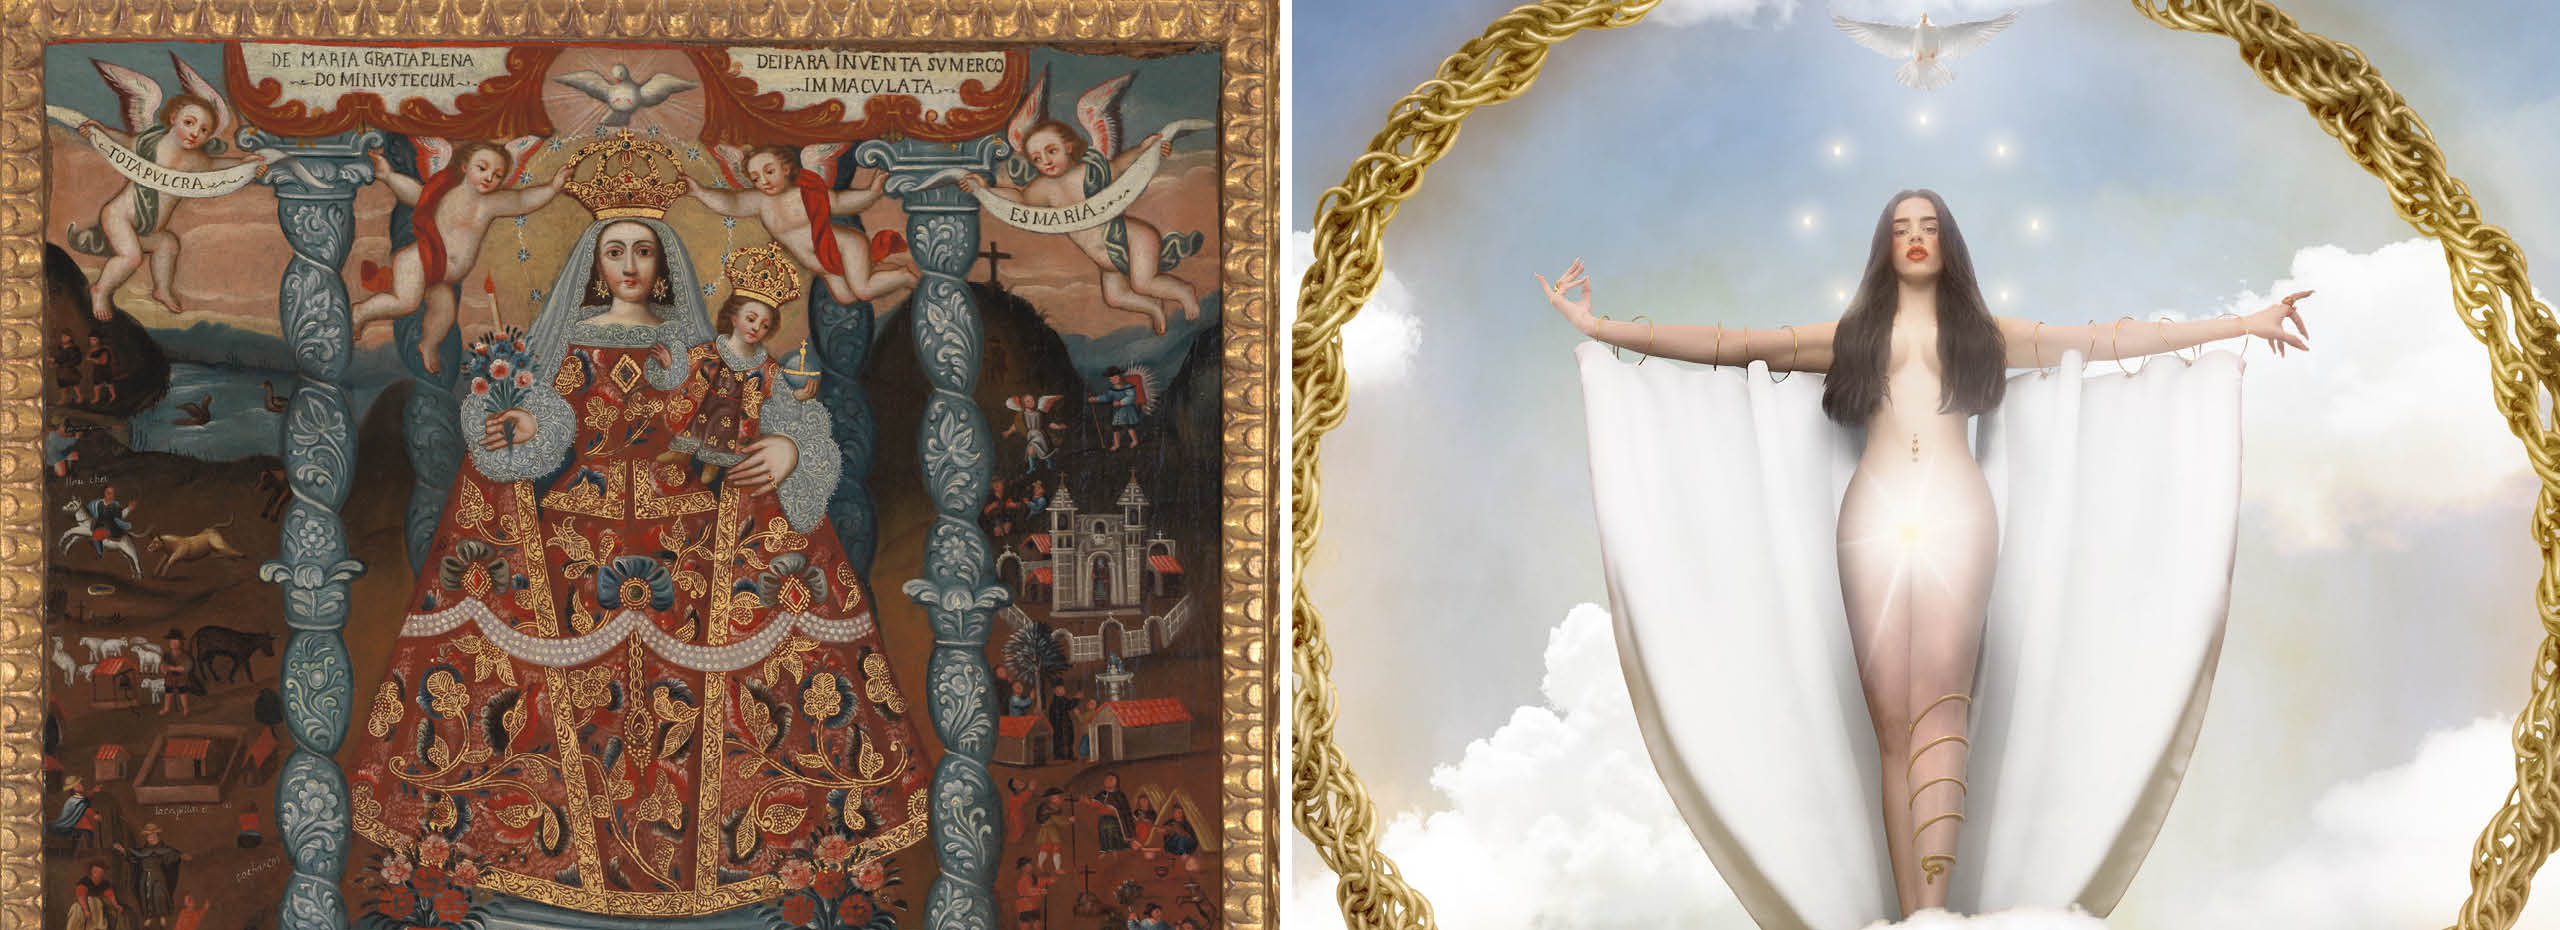 Side by side depictions of female figures in religious poses